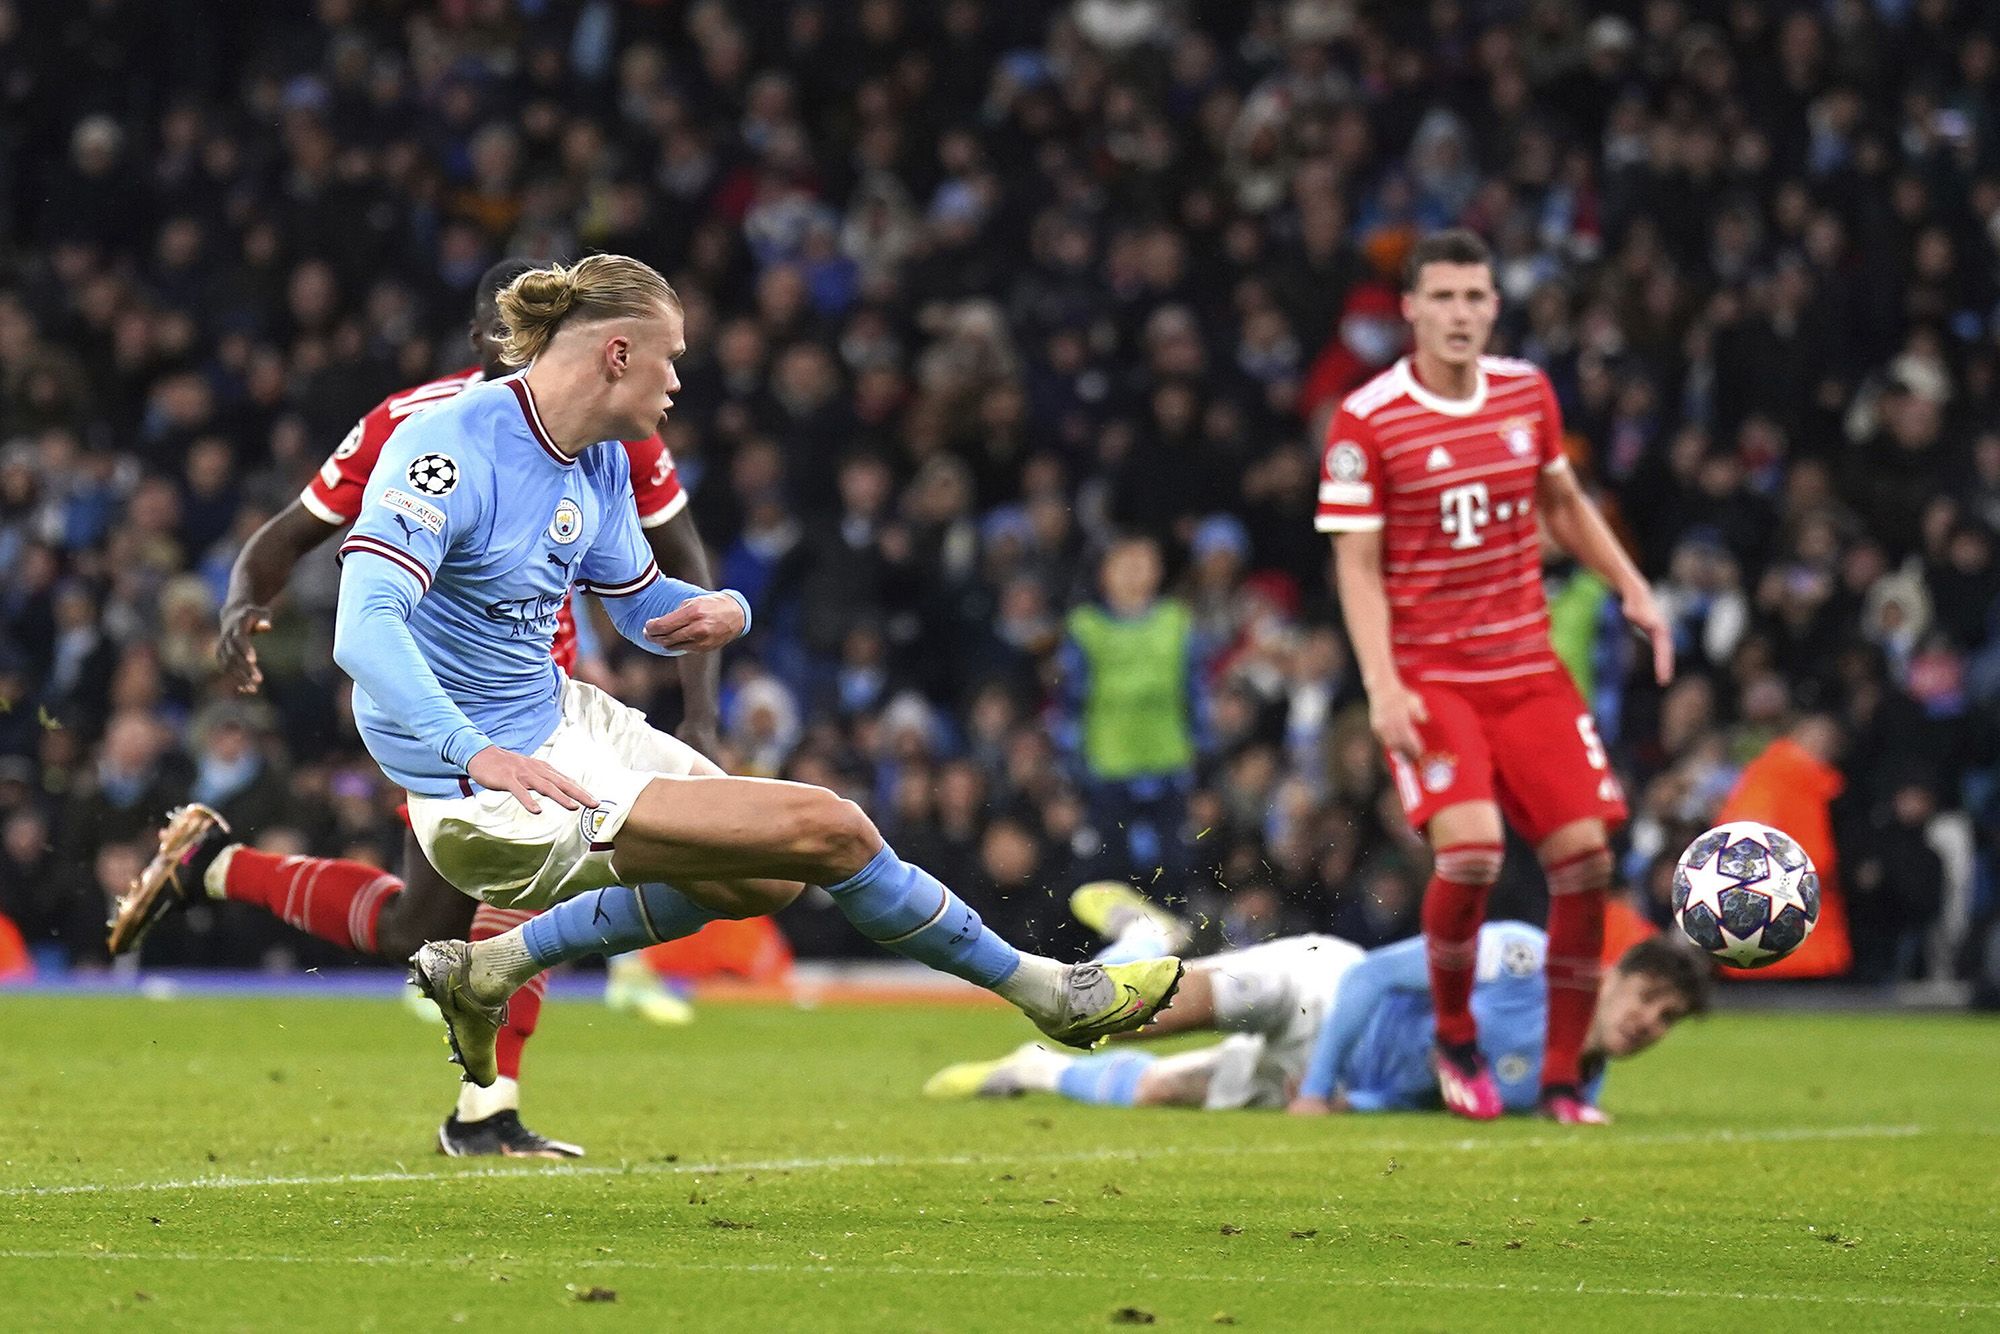 Facts & figures on FC Bayern vs. Manchester City